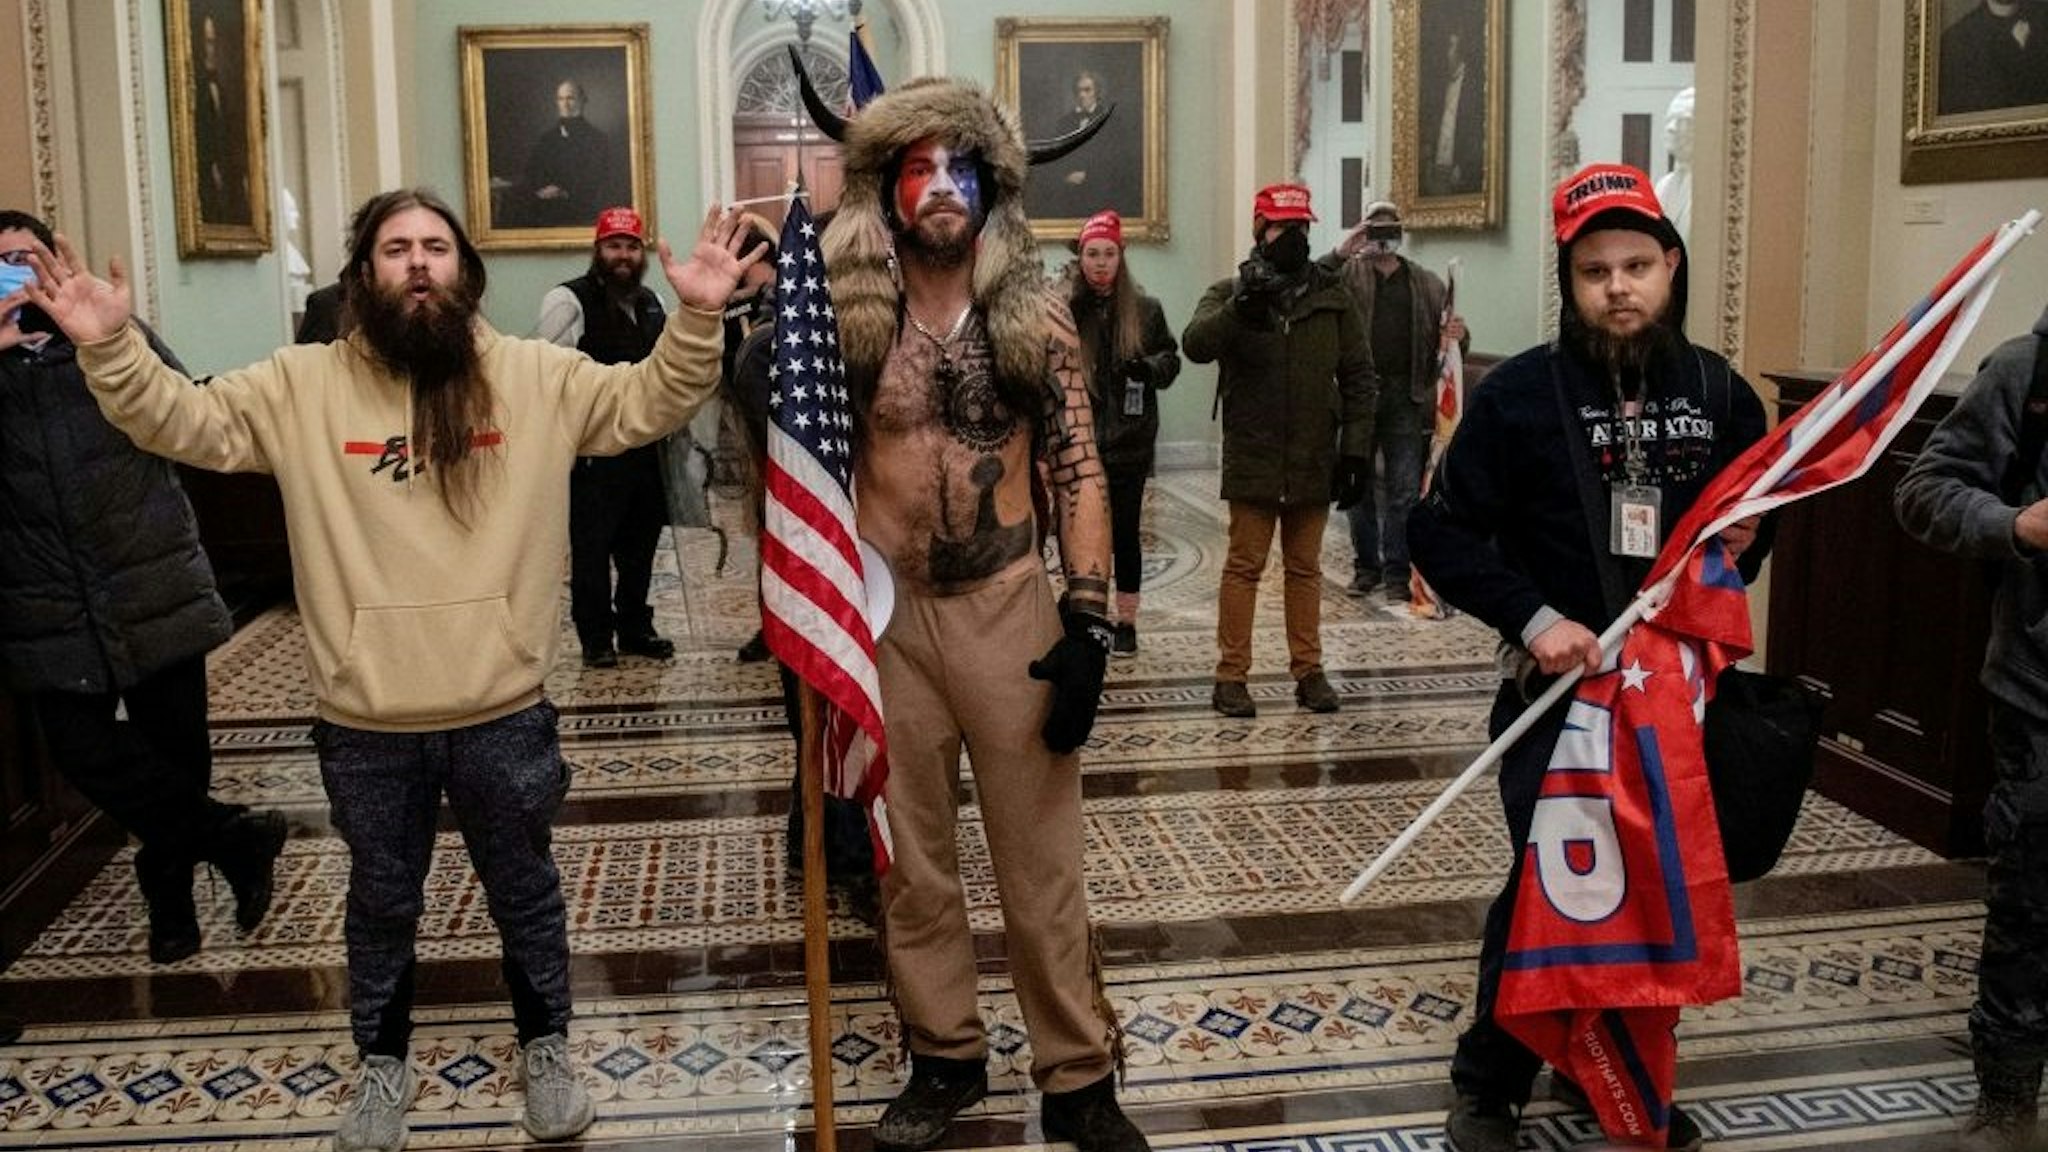 Supporters of US President Donald Trump, including Jake Angeli (C), a QAnon supporter known for his painted face and horned hat, enter the US Capitol on January 6, 2021, in Washington, DC.